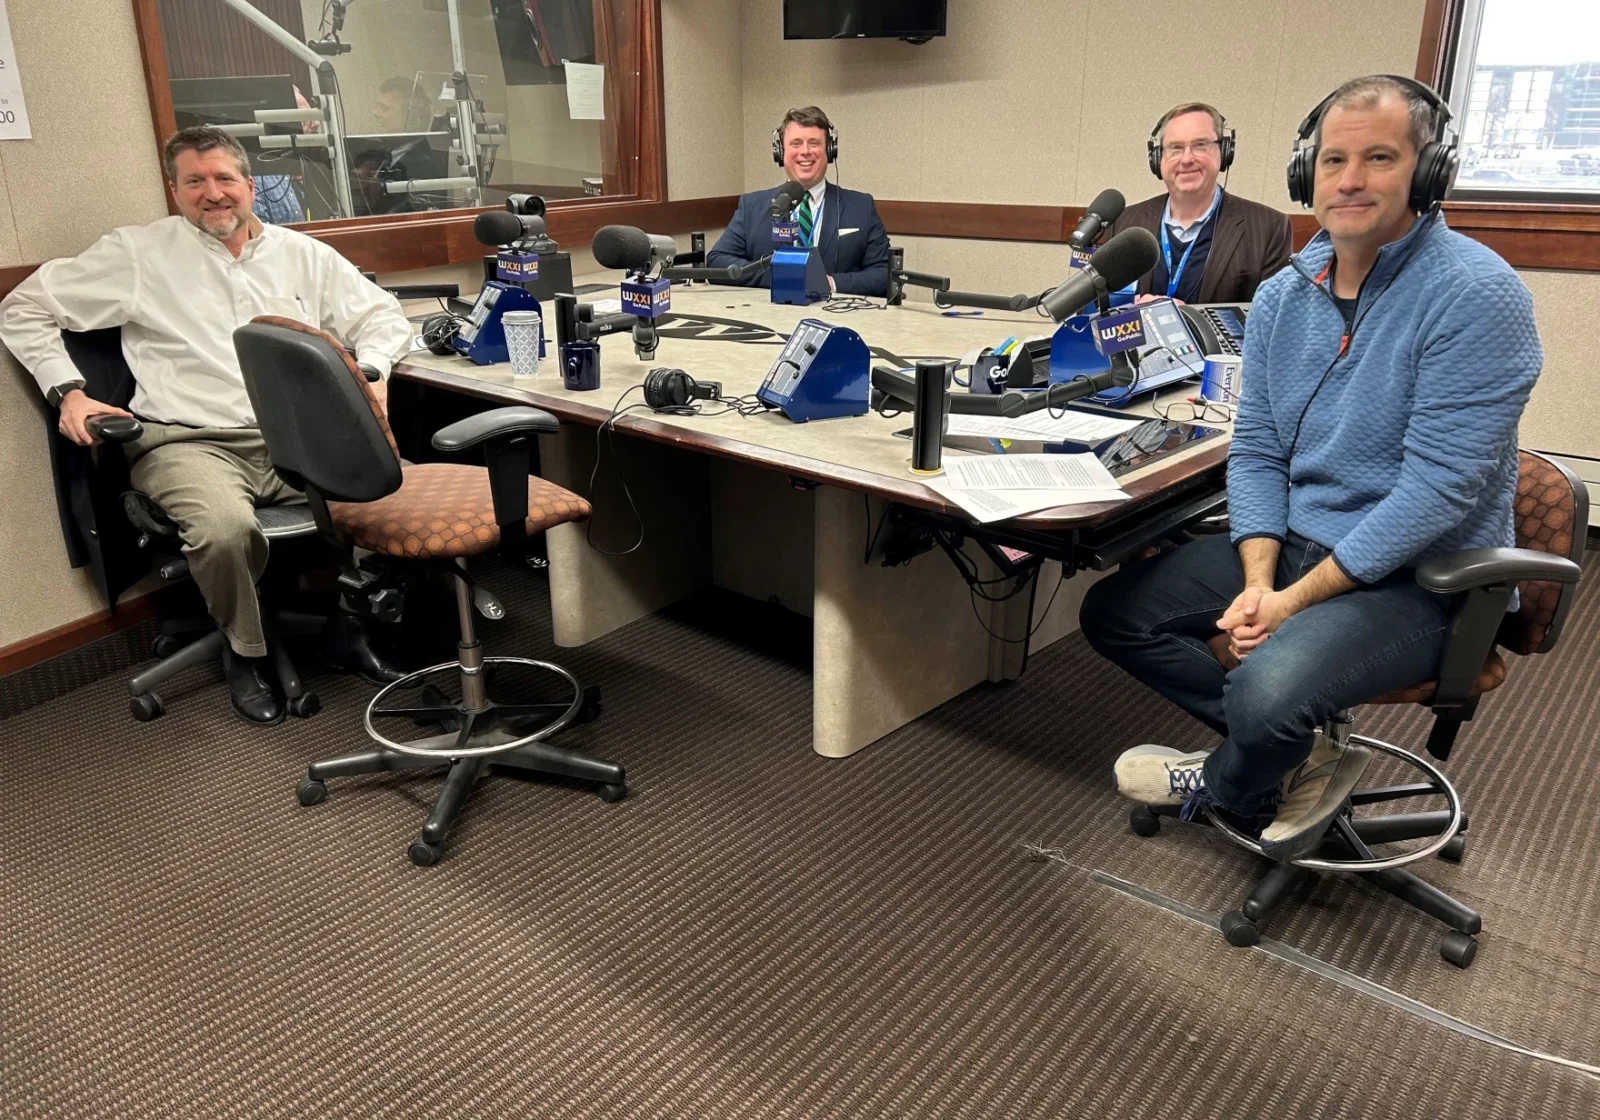 Golisano Institute president Dr. Ian Mortimer and faculty member Dr. Nathan Harris on WXXI’s Connections with Evan Dawson